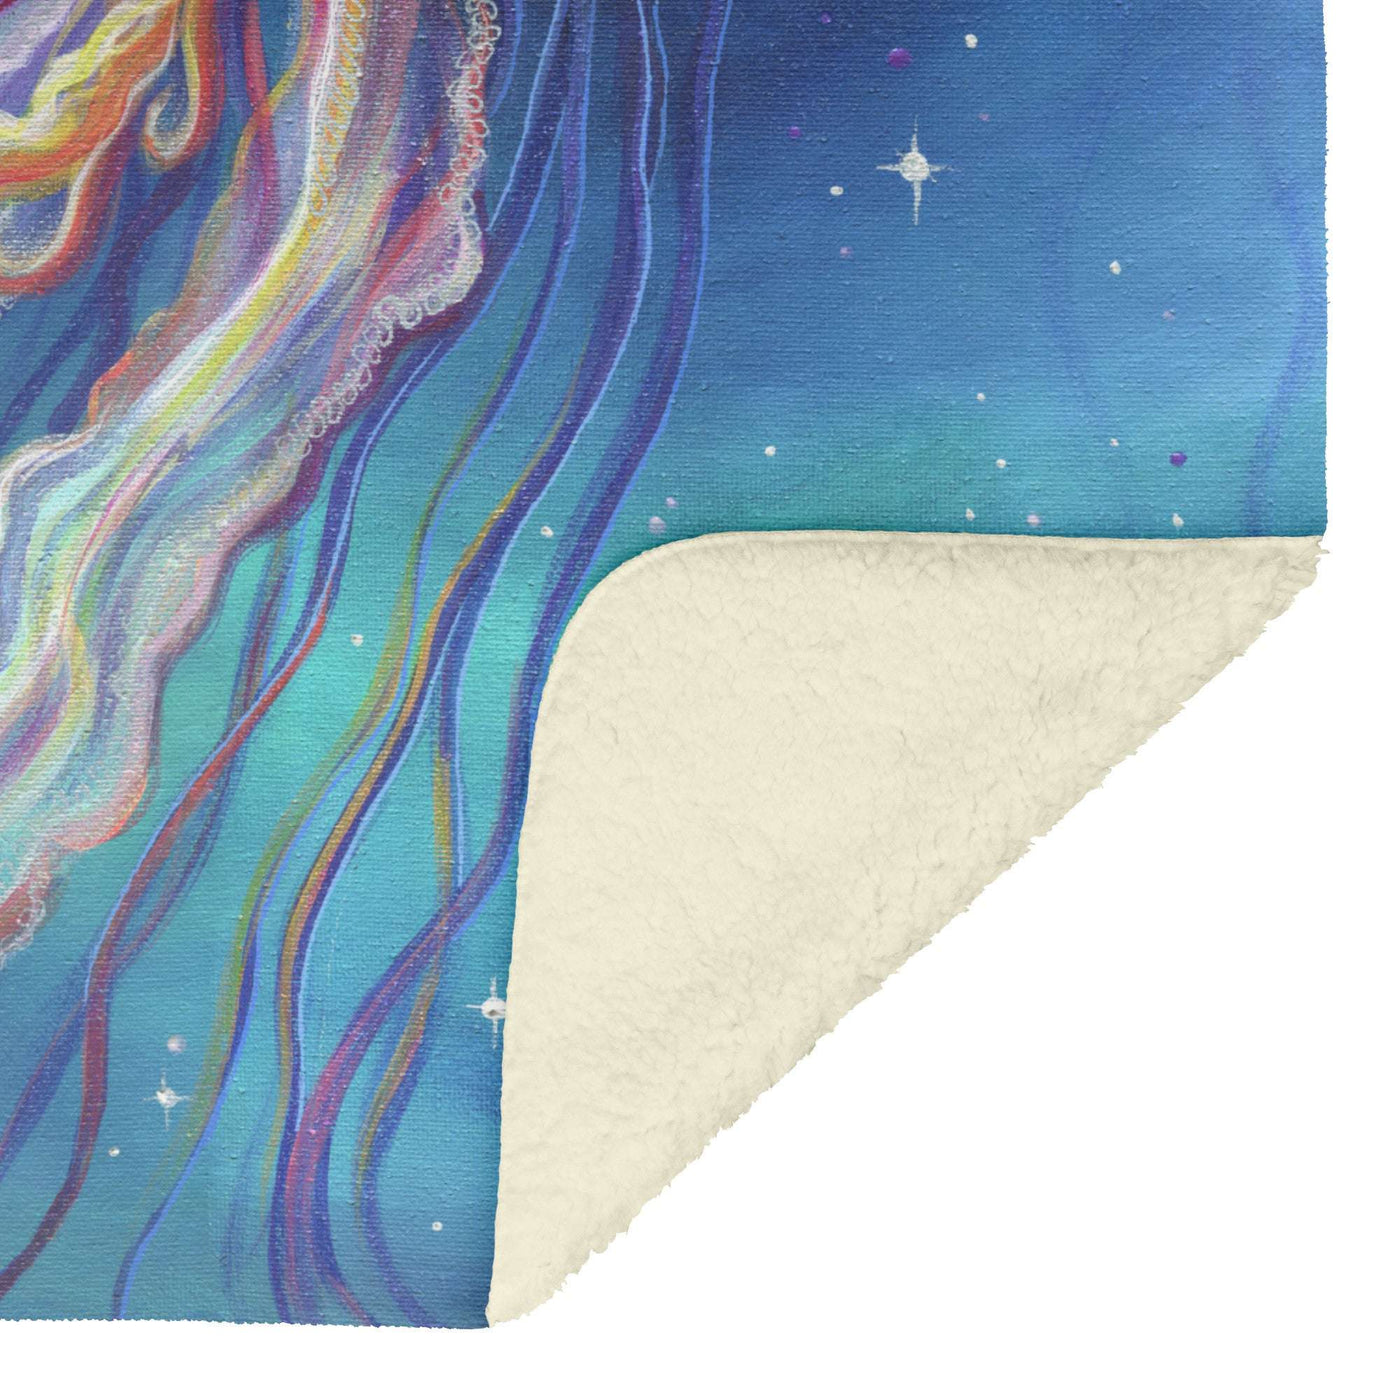 Sherpa blanket with a colorful jellyfish design against a starry sky background, the corner partially folded to show both sides